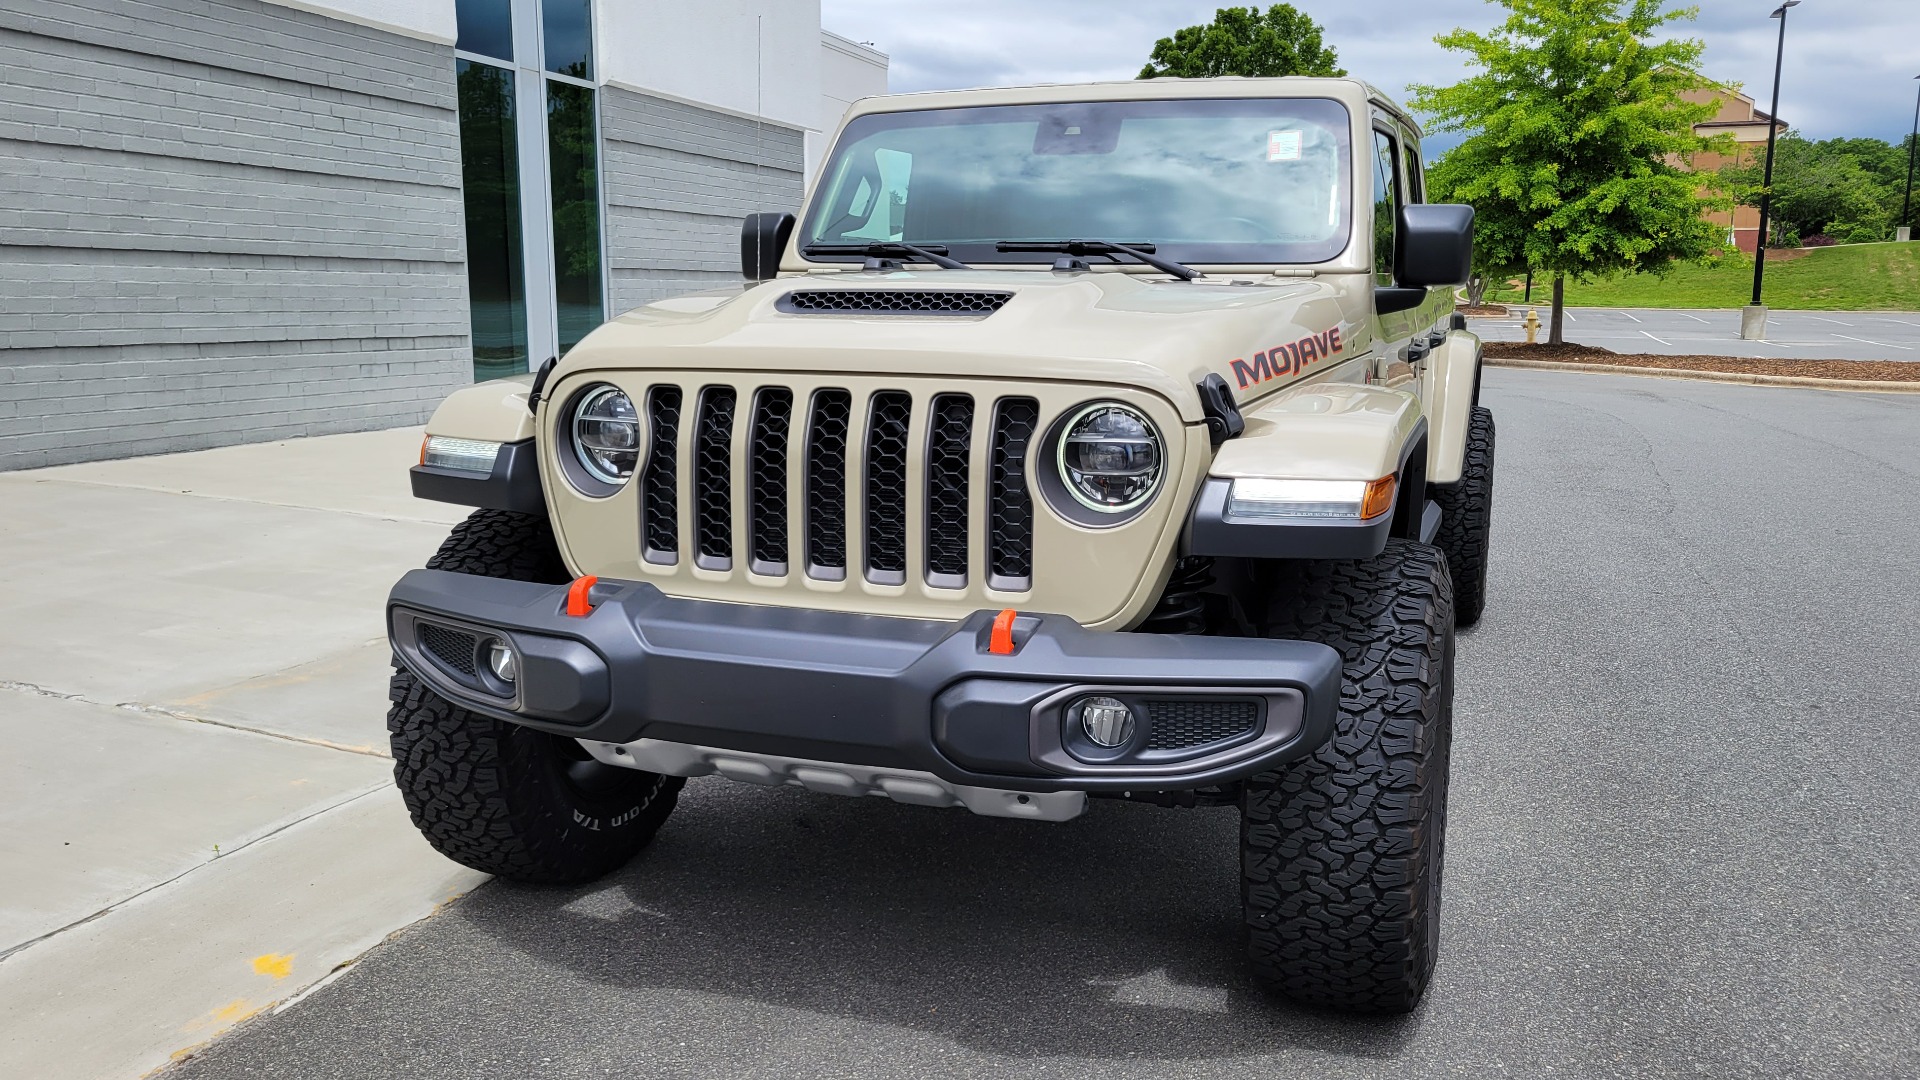 Used 2020 Jeep GLADIATOR MOJAVE 4X4 / 3.6L / AUTO / NAV / COLOR HARD-TOP / ALPINE / REARVIEW for sale $58,995 at Formula Imports in Charlotte NC 28227 4